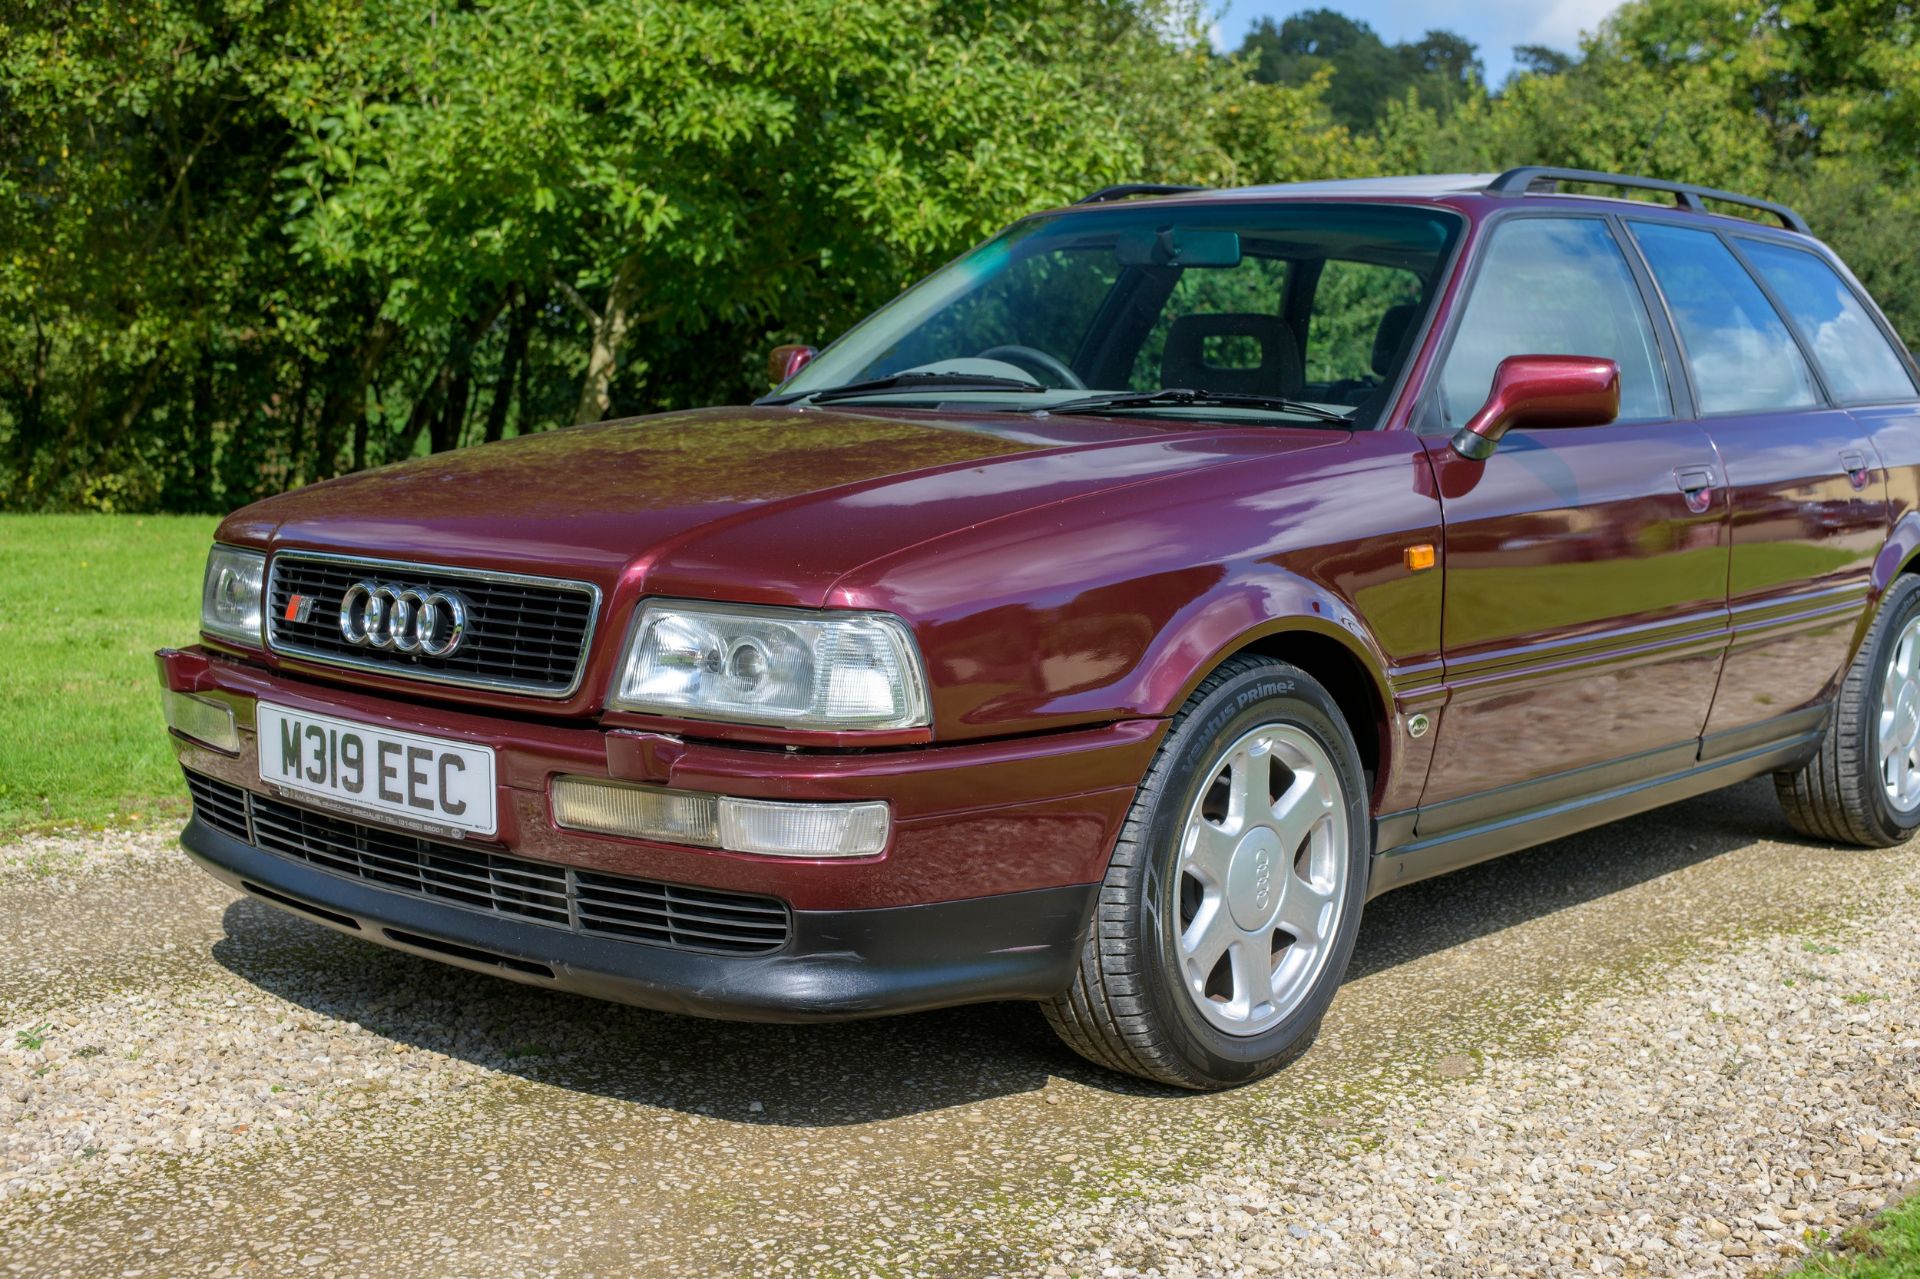 1995 AUDI S2 AVANT Registration Number: M319 EEC Chassis Number: WAUZZZ8CZSA007967 - Two private - Image 2 of 34